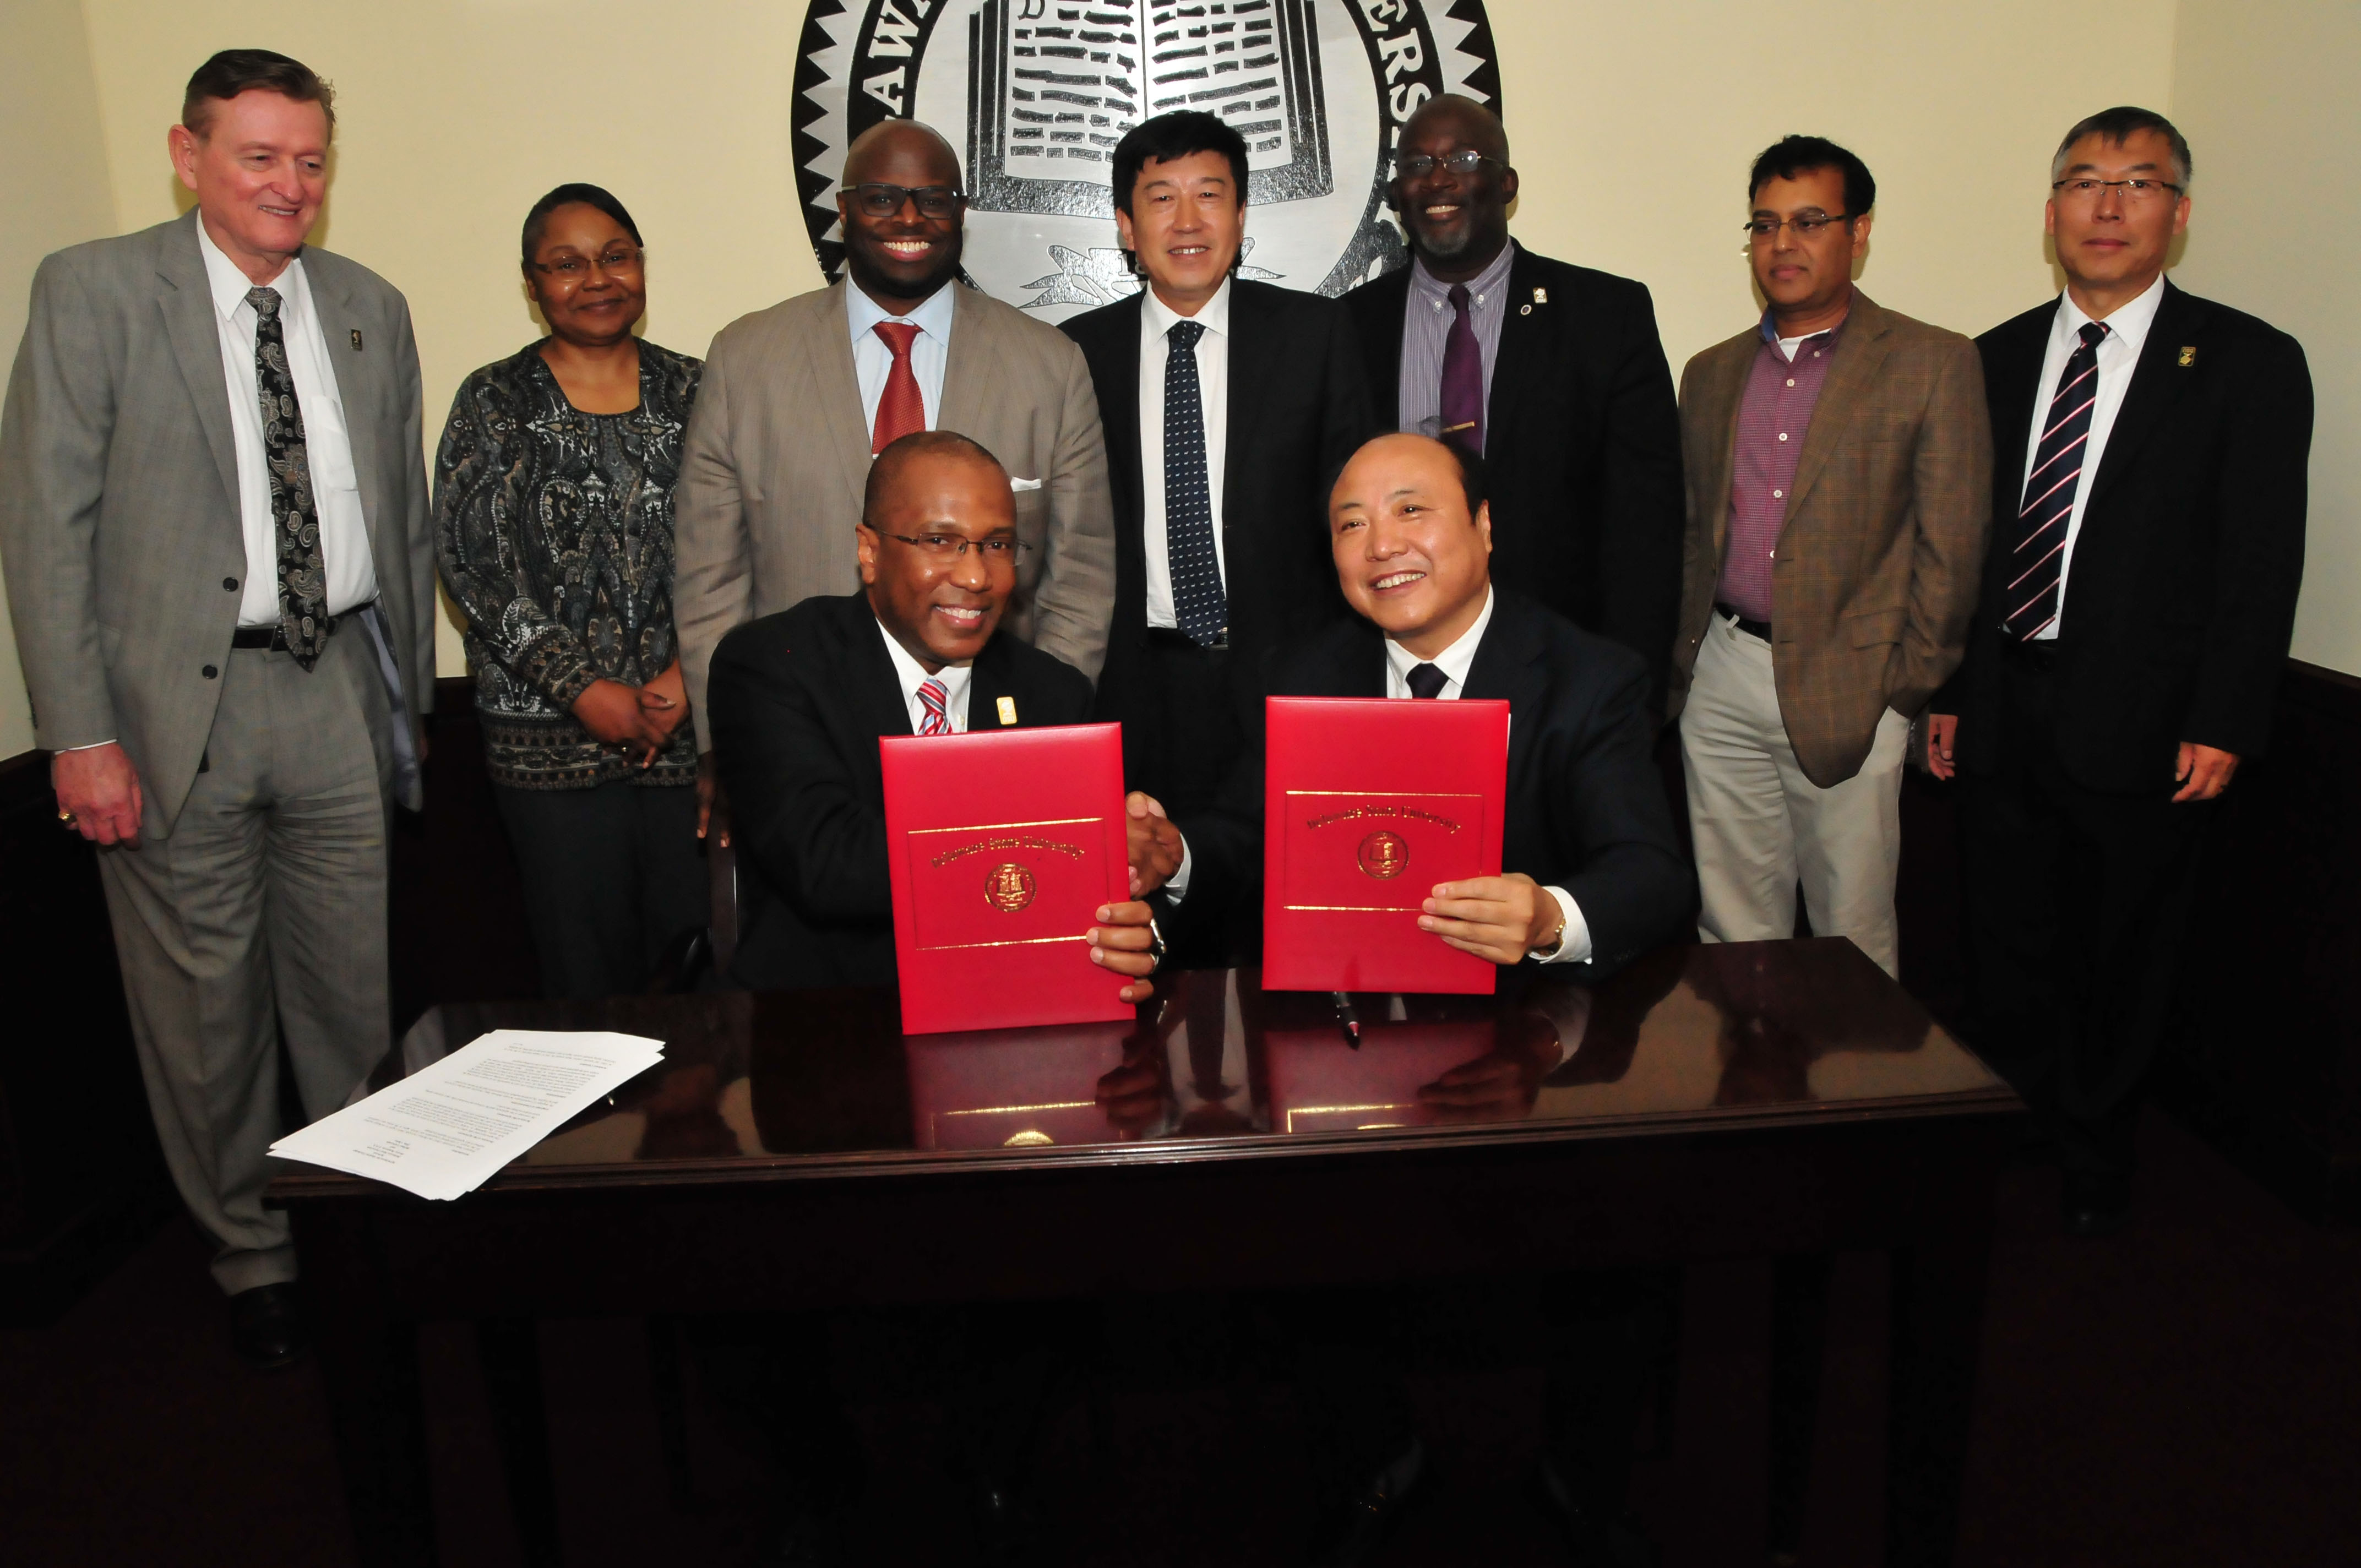 (Seated l-r) DSU President Harry L. Williams and Beihua University VP of Research Dr. Xiang Deming shake hands and hold a joint agreement concerning study abroad opportunities. (Standing l-r) Associate Provost Brad Skelcher, Vice Provost Saundra DeLauder, Provost Tony Allen, Interim Dean Charlie Wilson (College of Mathematics, Natural Sciences and Technology), Dr. Mukti Rana, chair of the Department of Physics and Pre-Engineering, and International Affairs Associate Vice President Fengshan Liu.